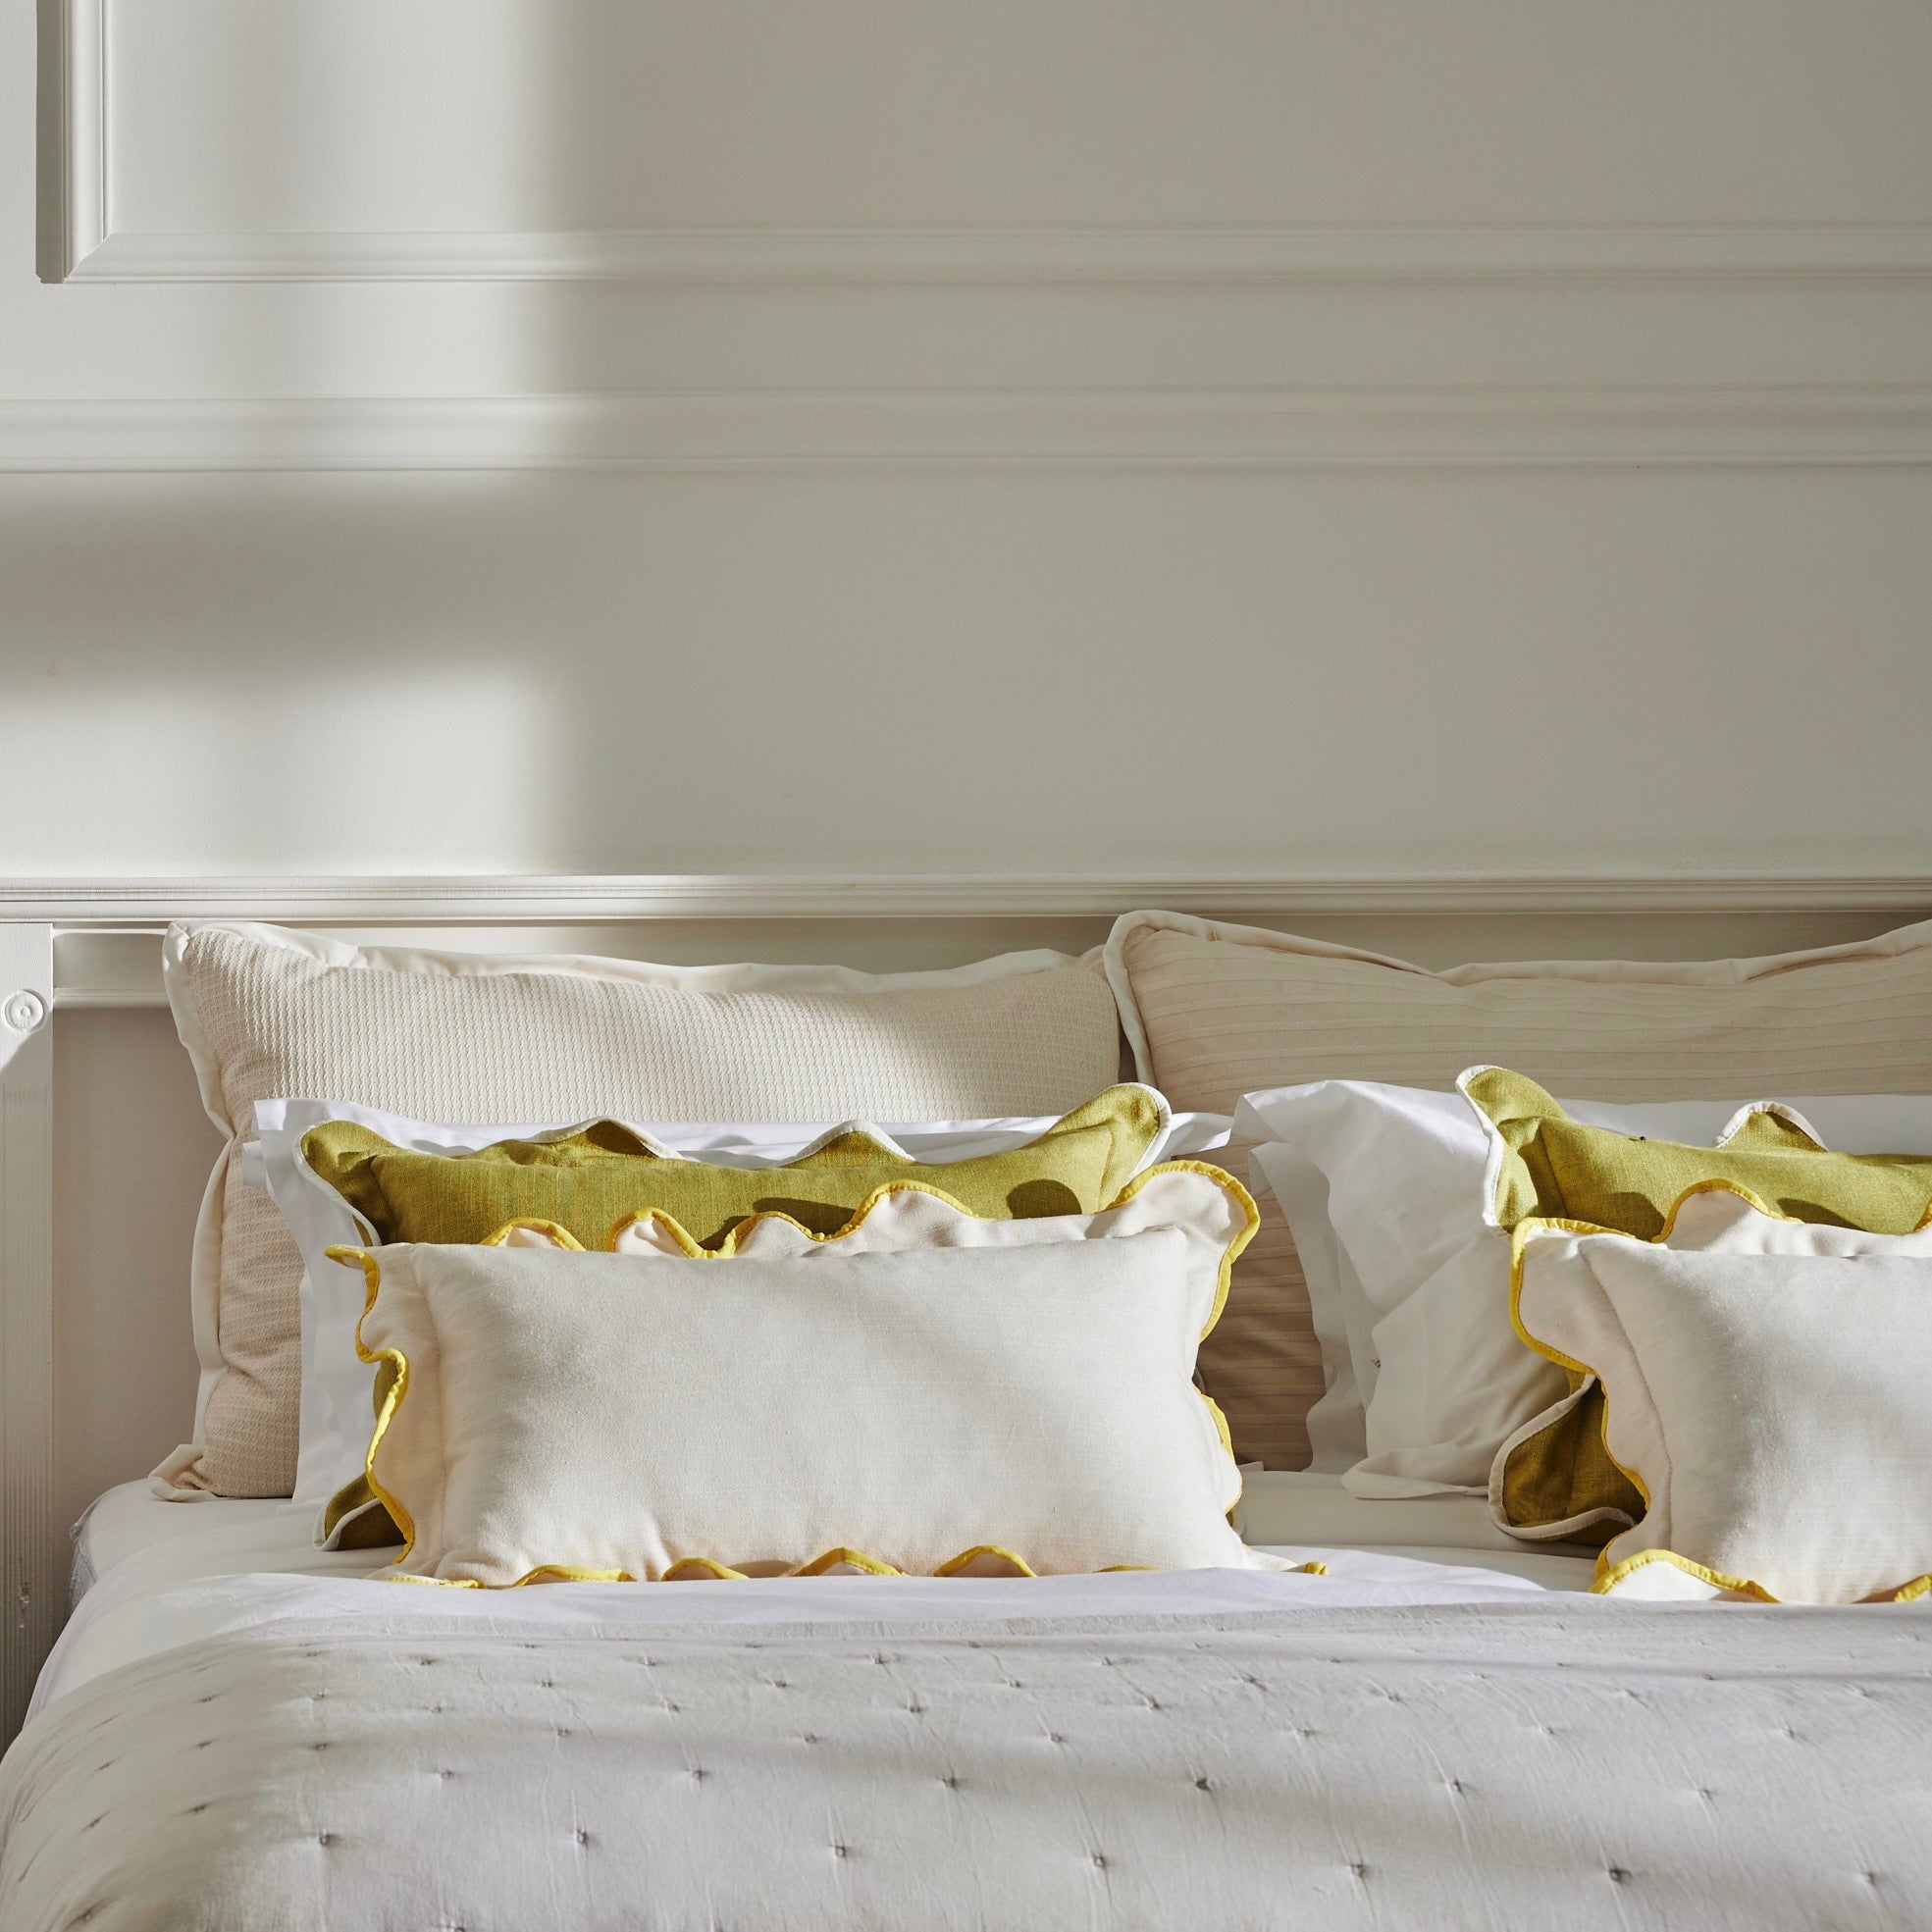 Bed linen - The Finishing Store South Africa